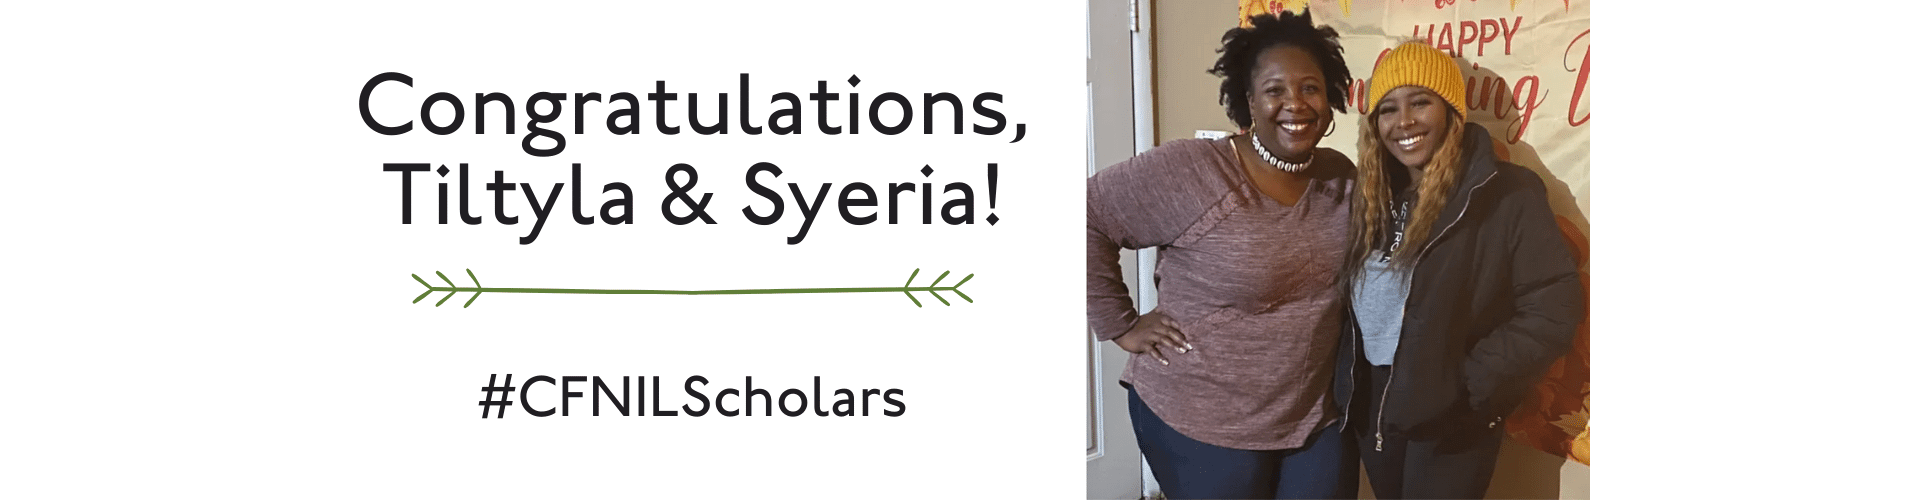 Congratulations, Tiltyla and Syeria! #CFNILScholars. Picture of two smiling women. 